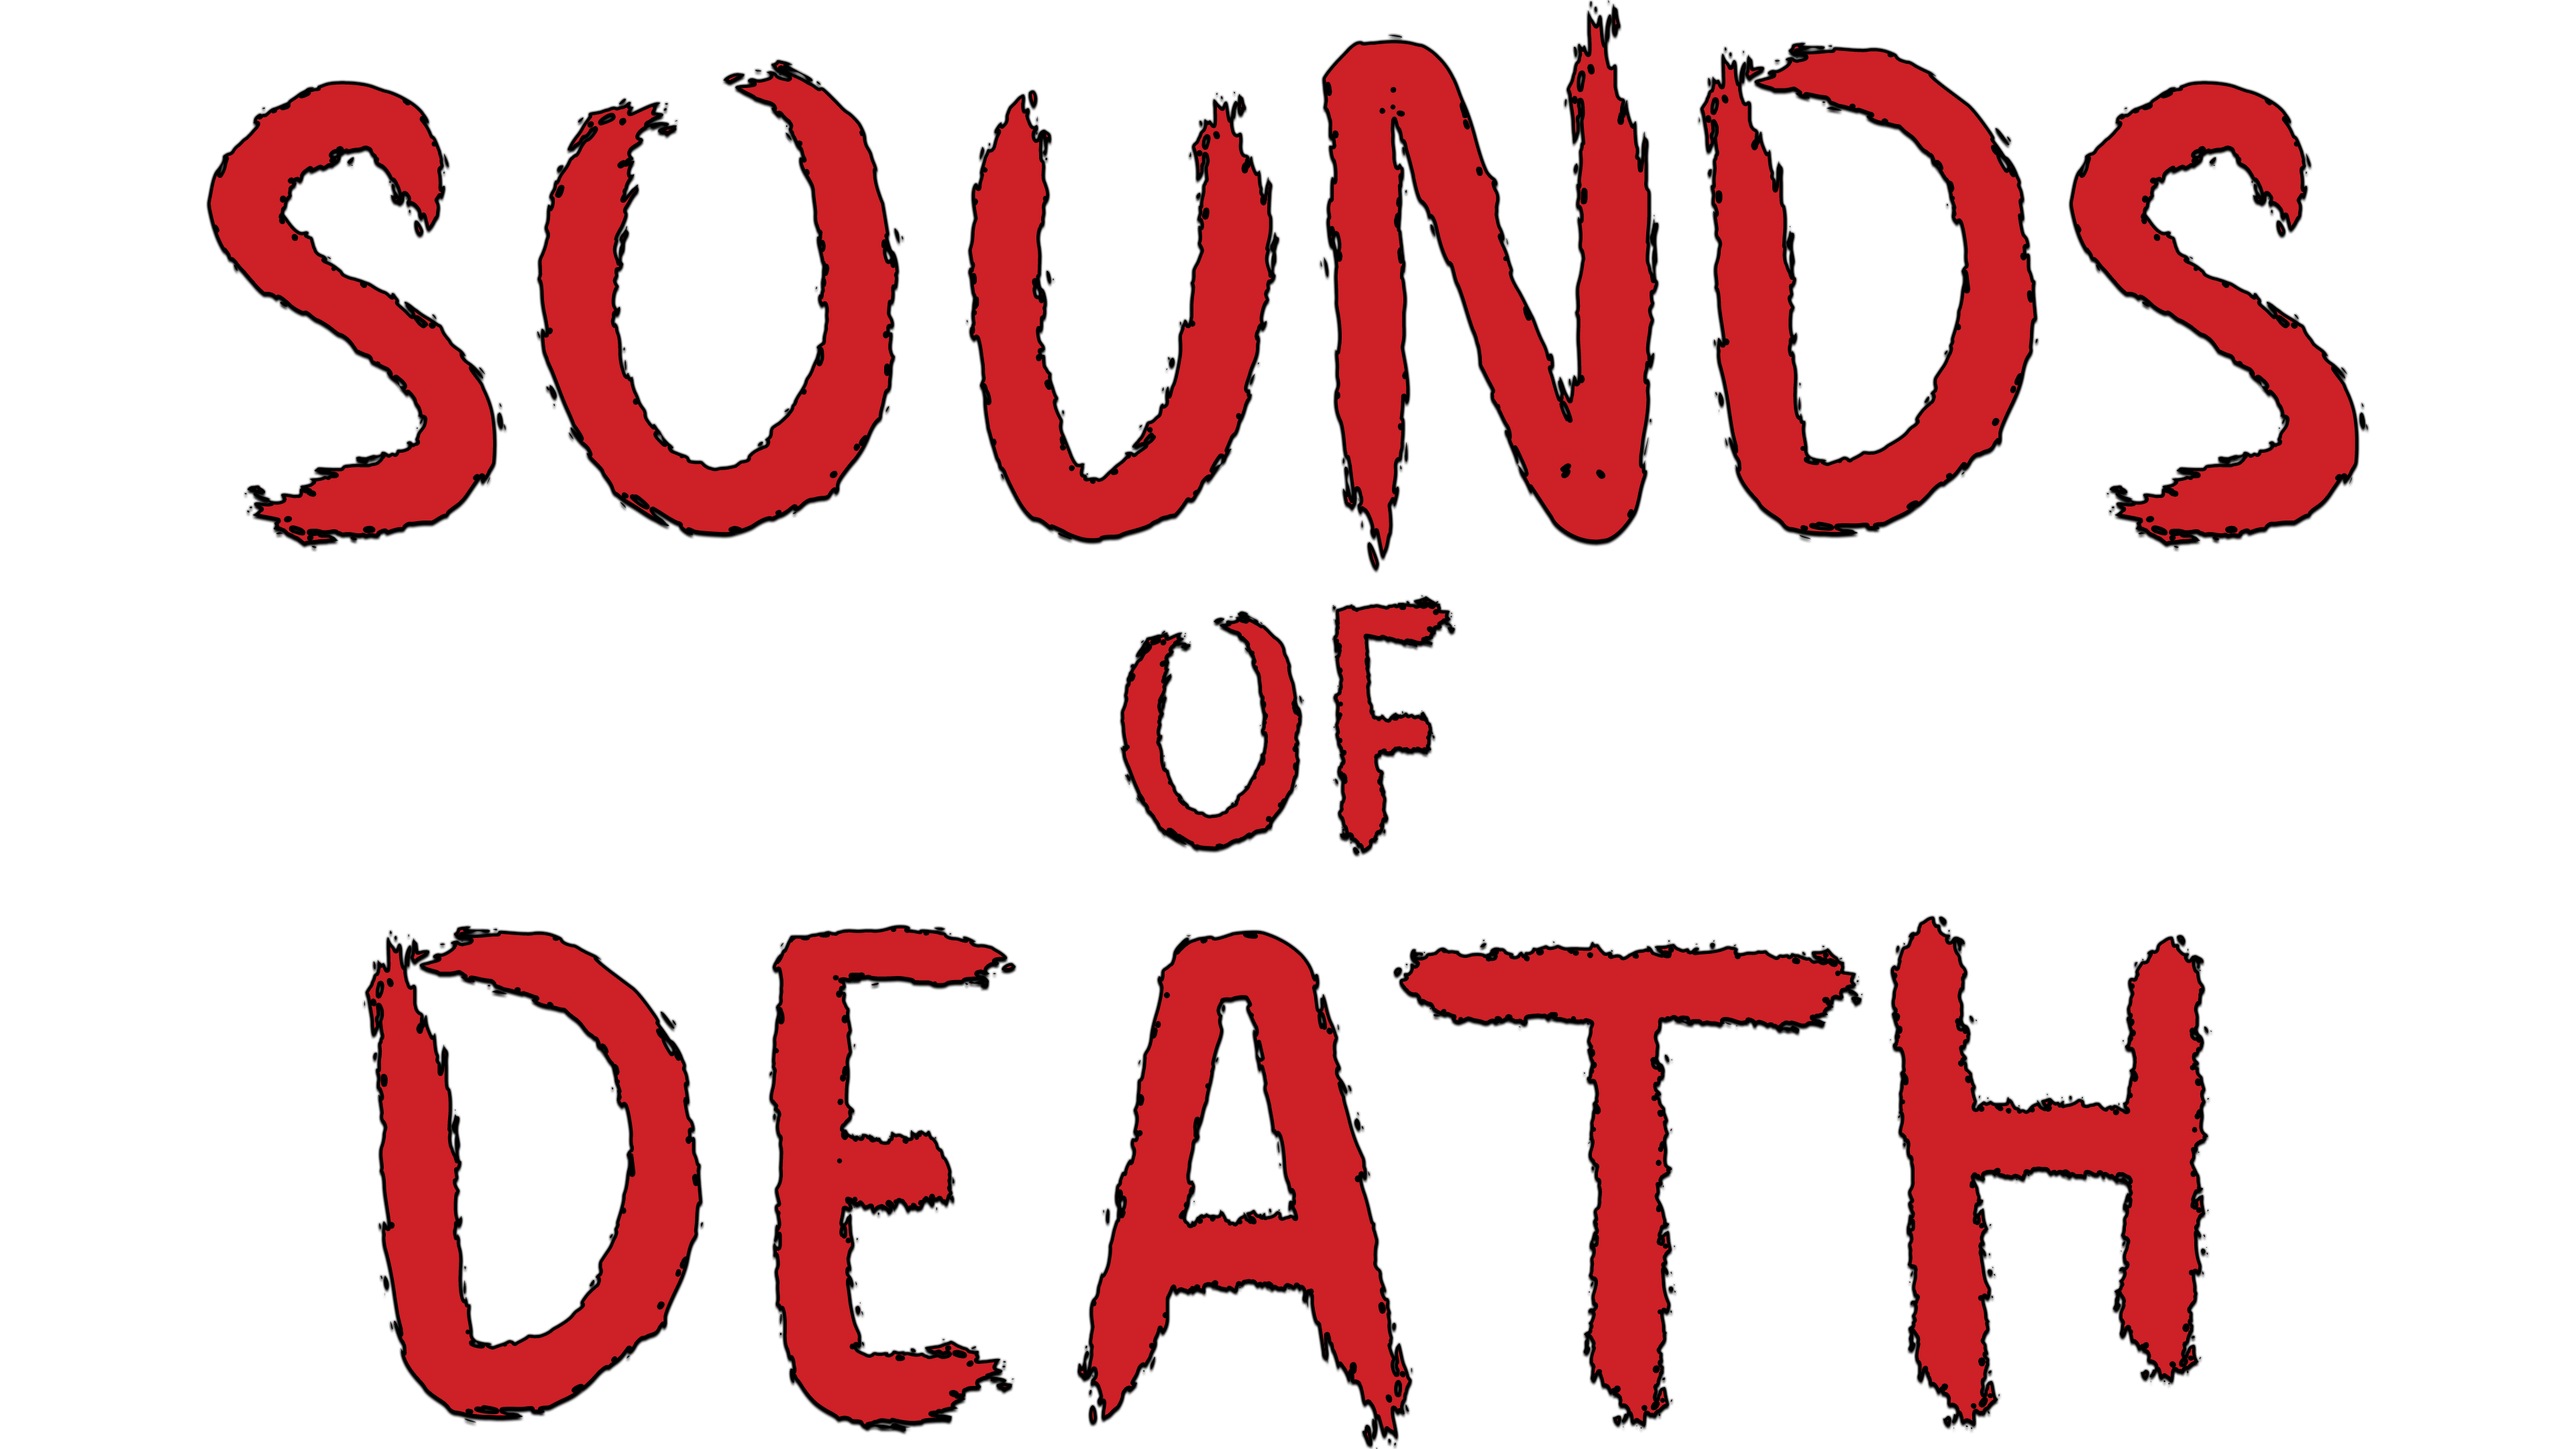 Sounds of Death